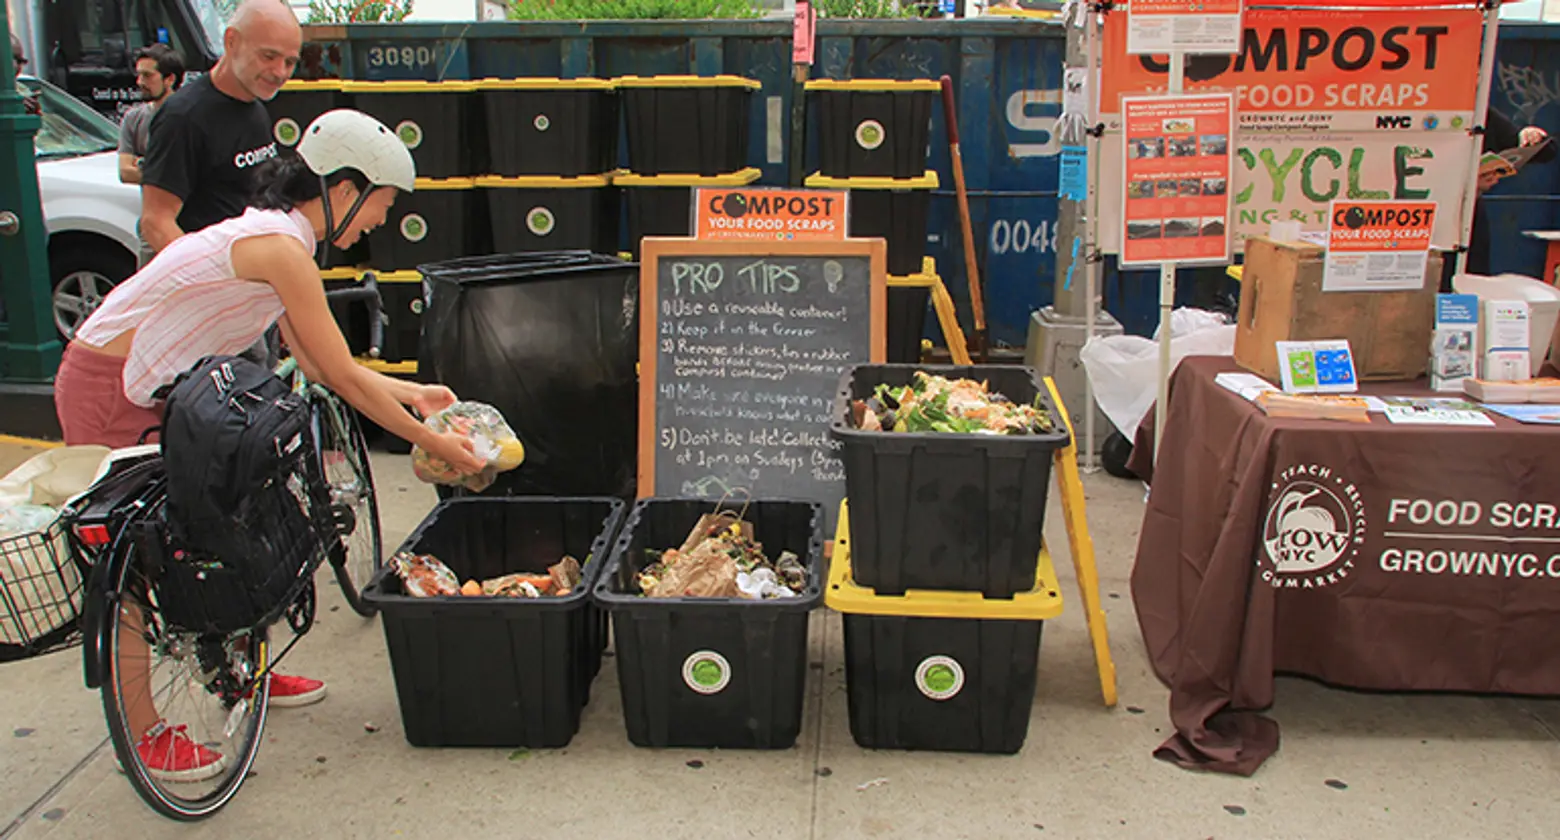 Adams proposes NYC's first composting mandate